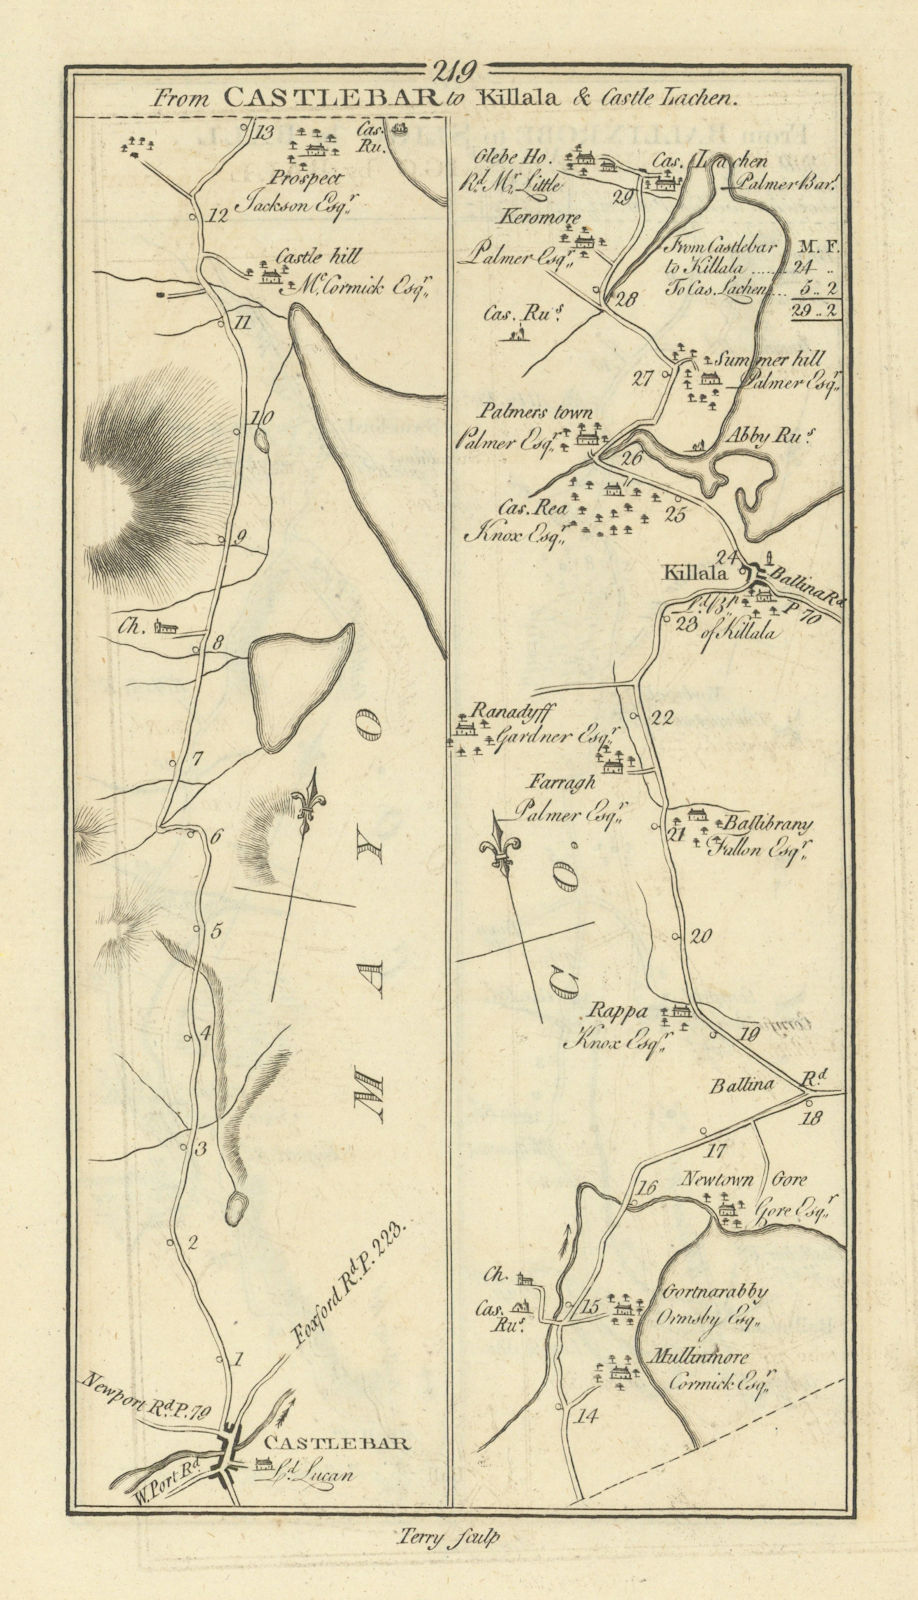 Associate Product #219 From Castlebar to Killala & Castle Lachan. Mayo. TAYLOR/SKINNER 1778 map